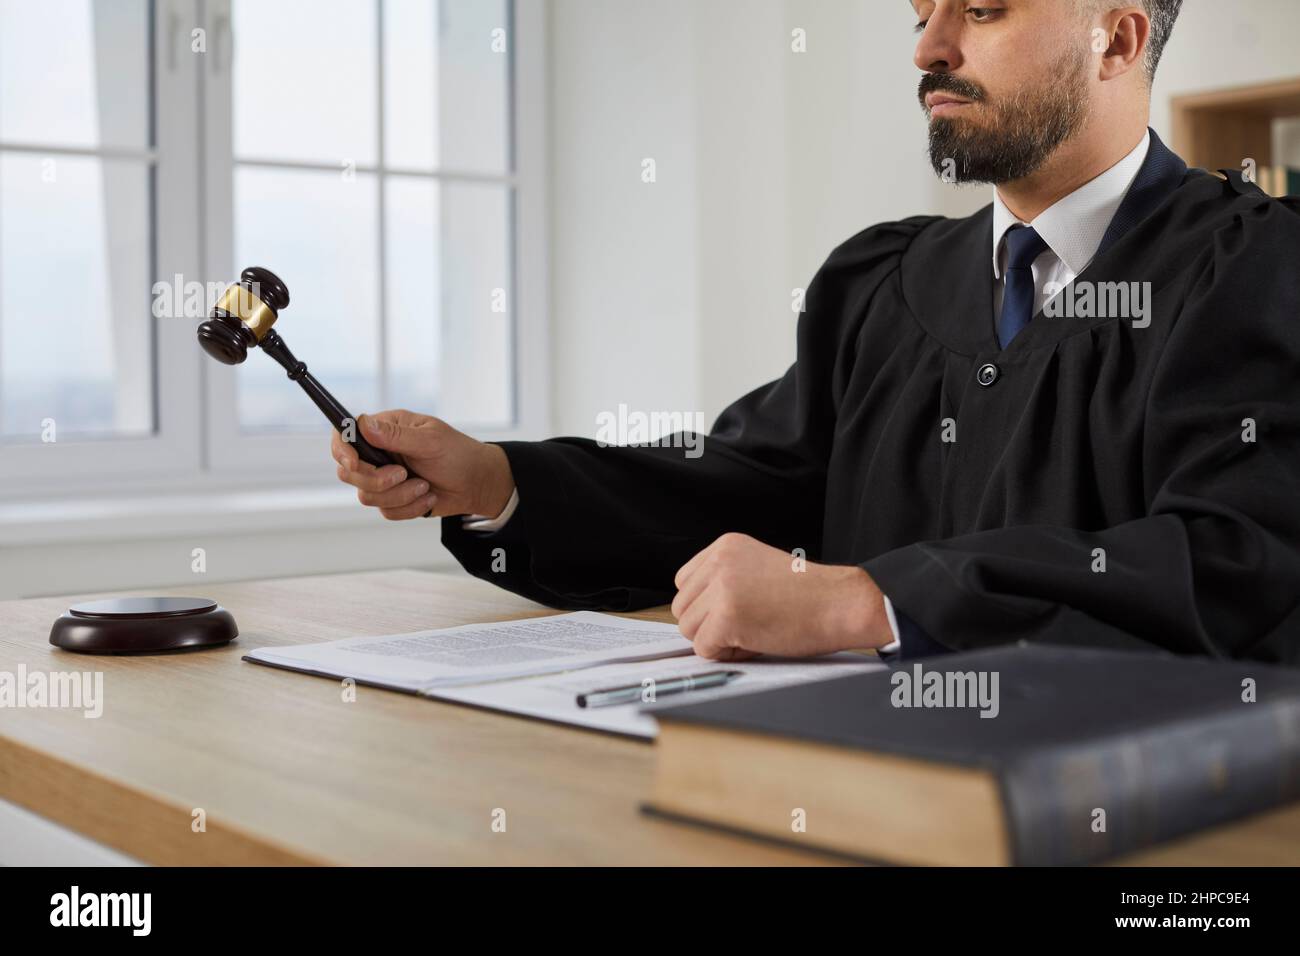 Male judge banging the gavel and giving his judgment at the end of the court trial Stock Photo